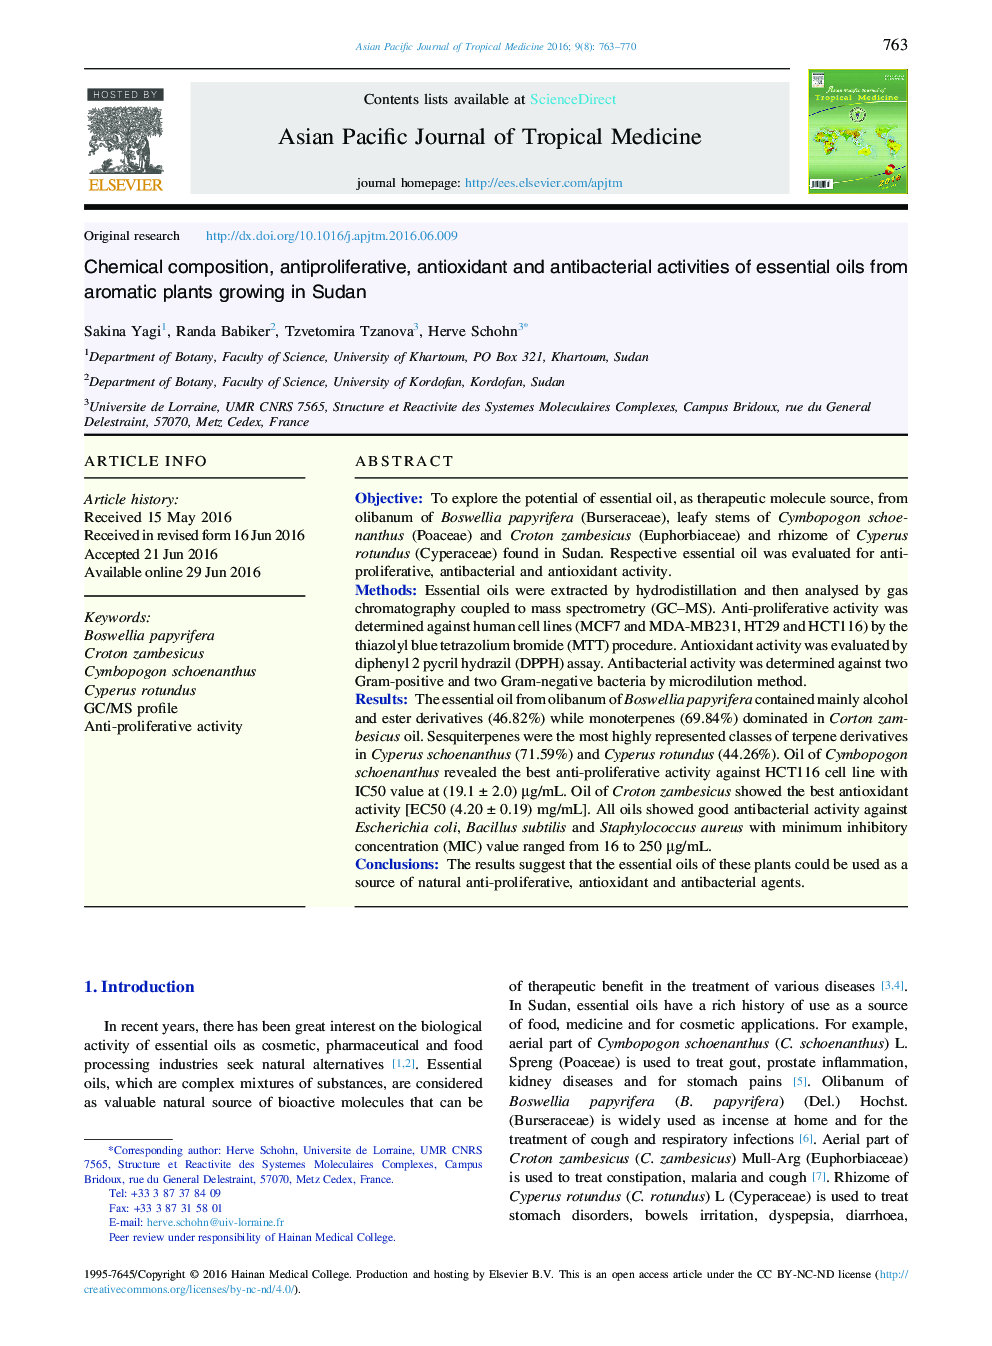 Chemical composition, antiproliferative, antioxidant and antibacterial activities of essential oils from aromatic plants growing in Sudan 